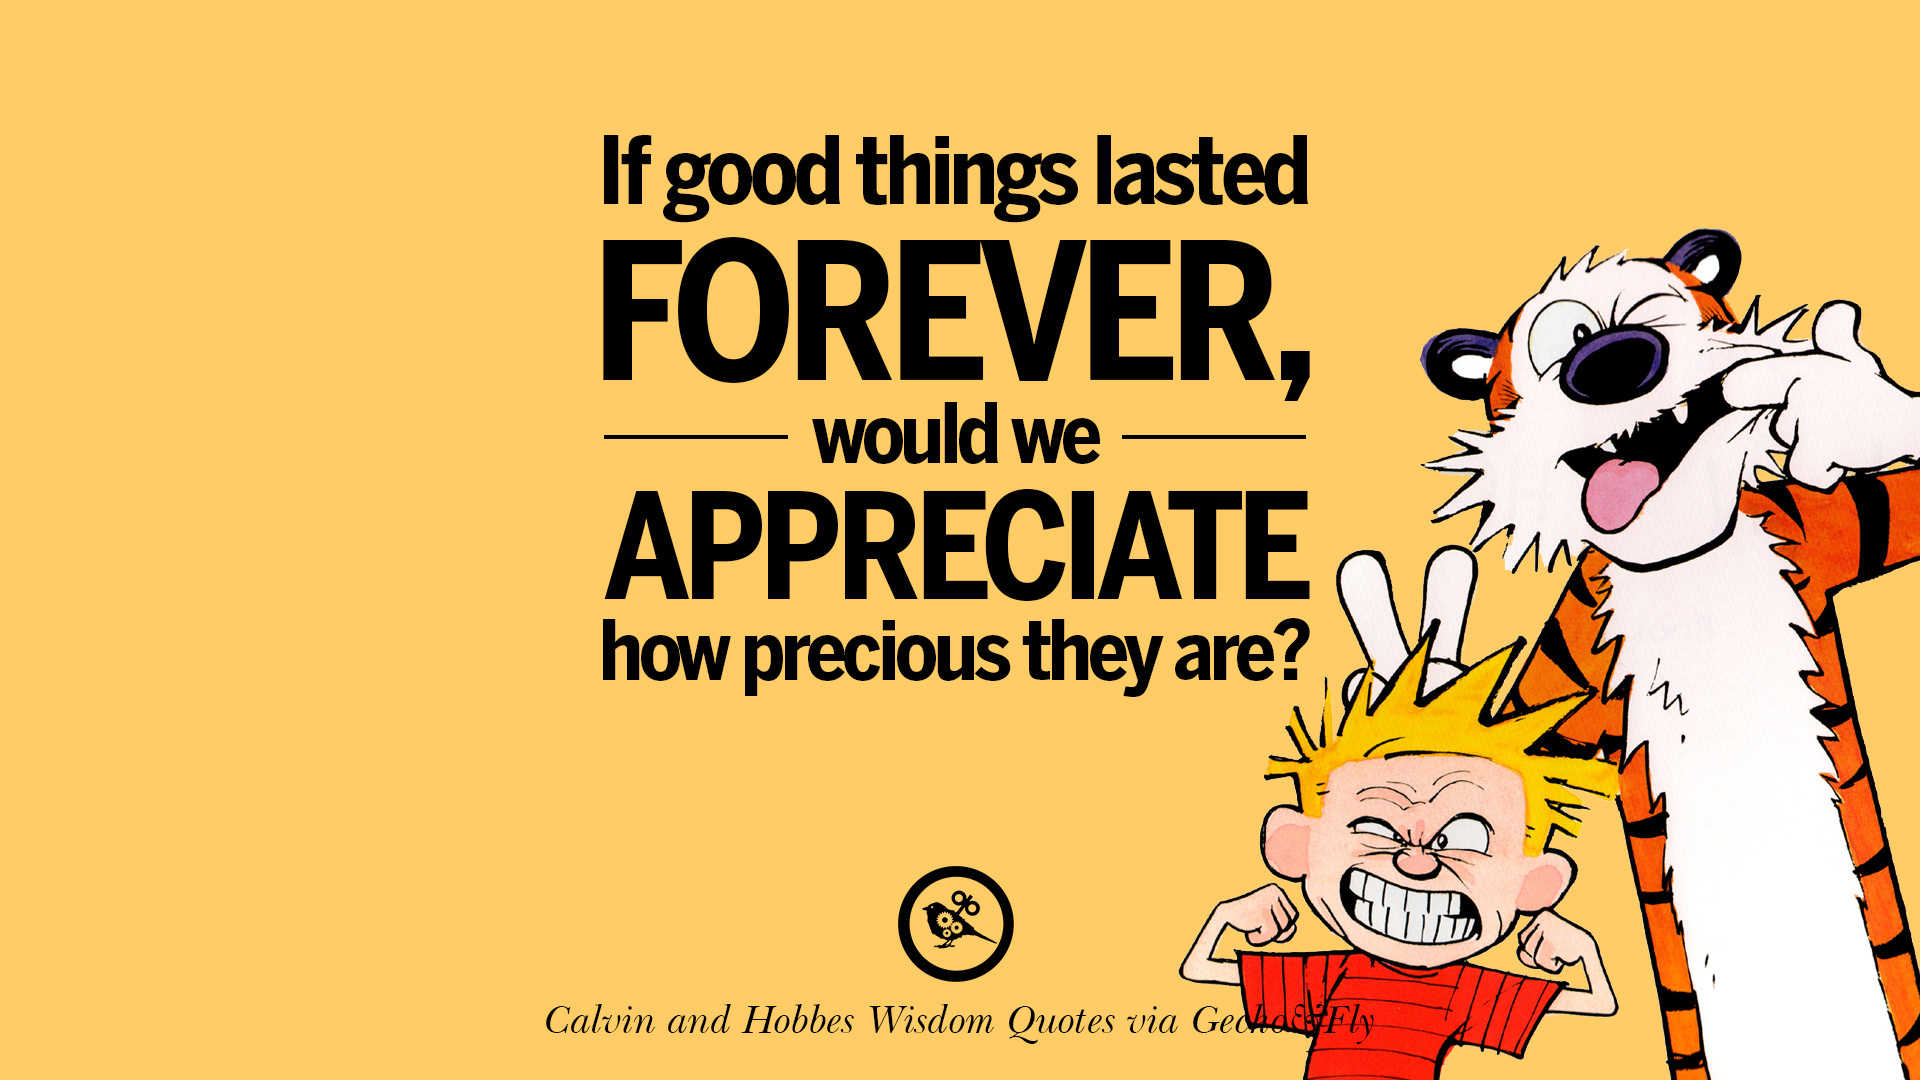 If good things lasted forever would we appreciate how precious they are [ ic Source ]